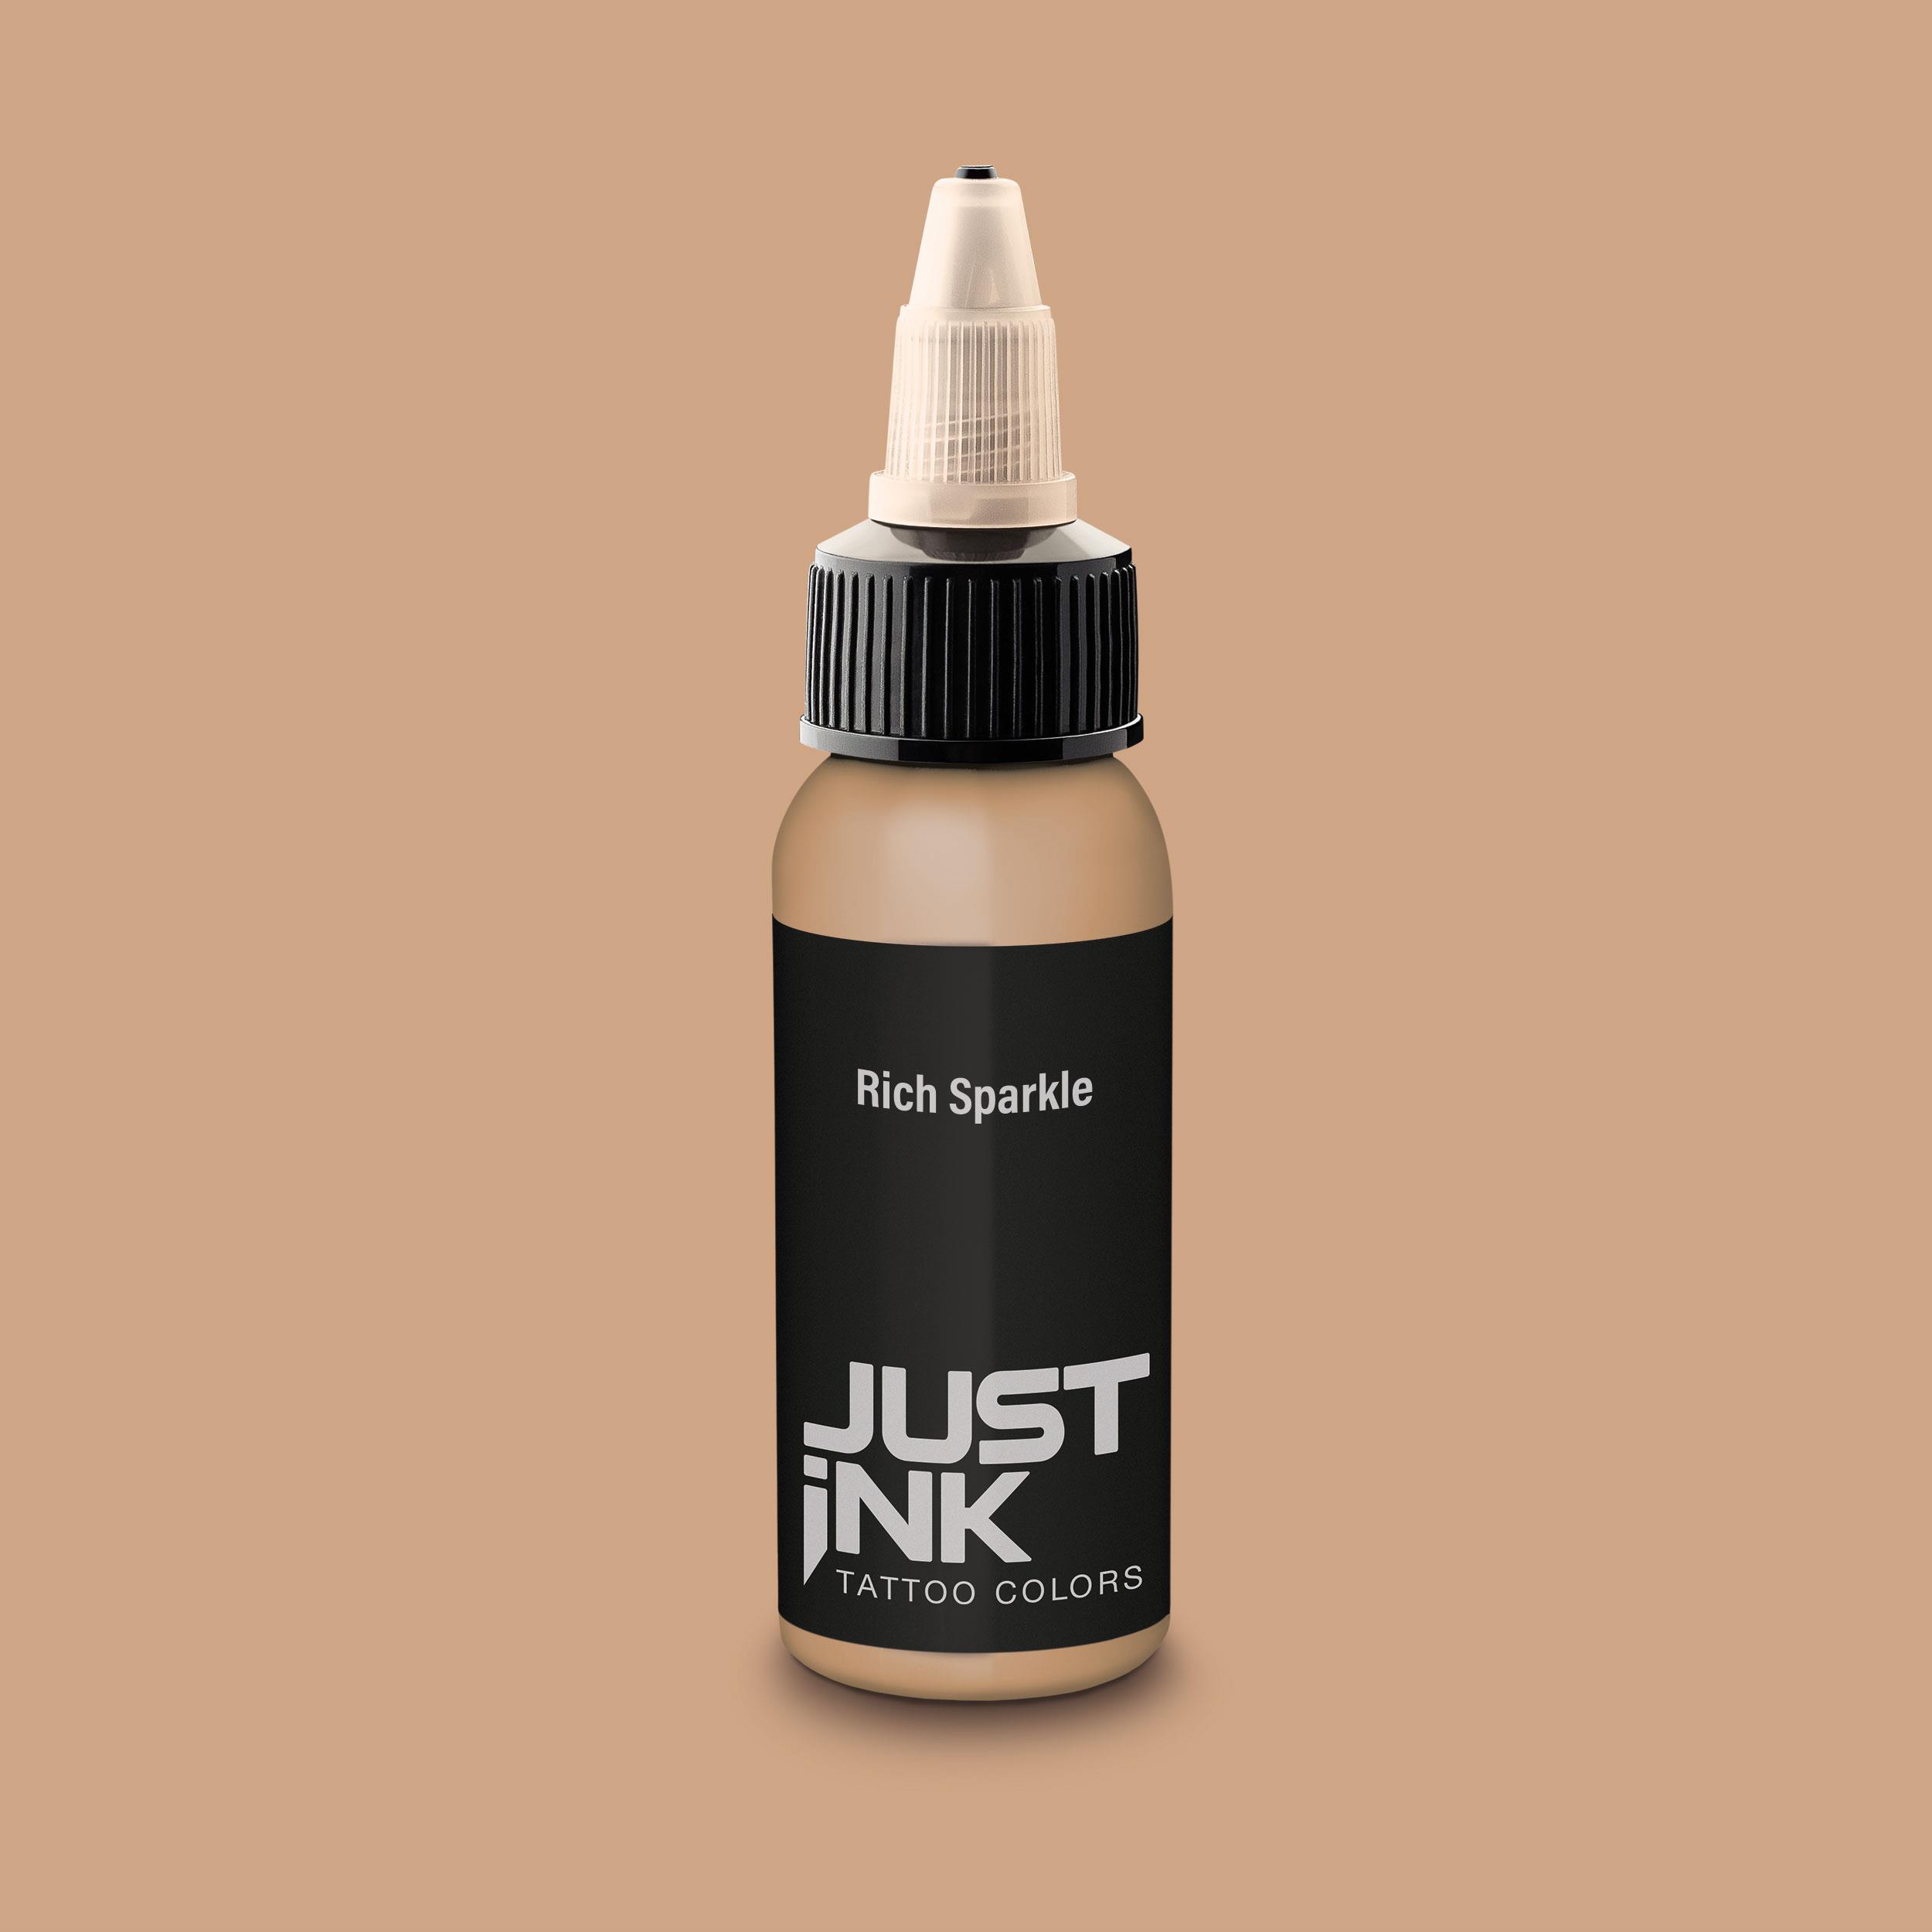 Just Ink - Tattoo Farbe - Rich Sparkle - 30 ml